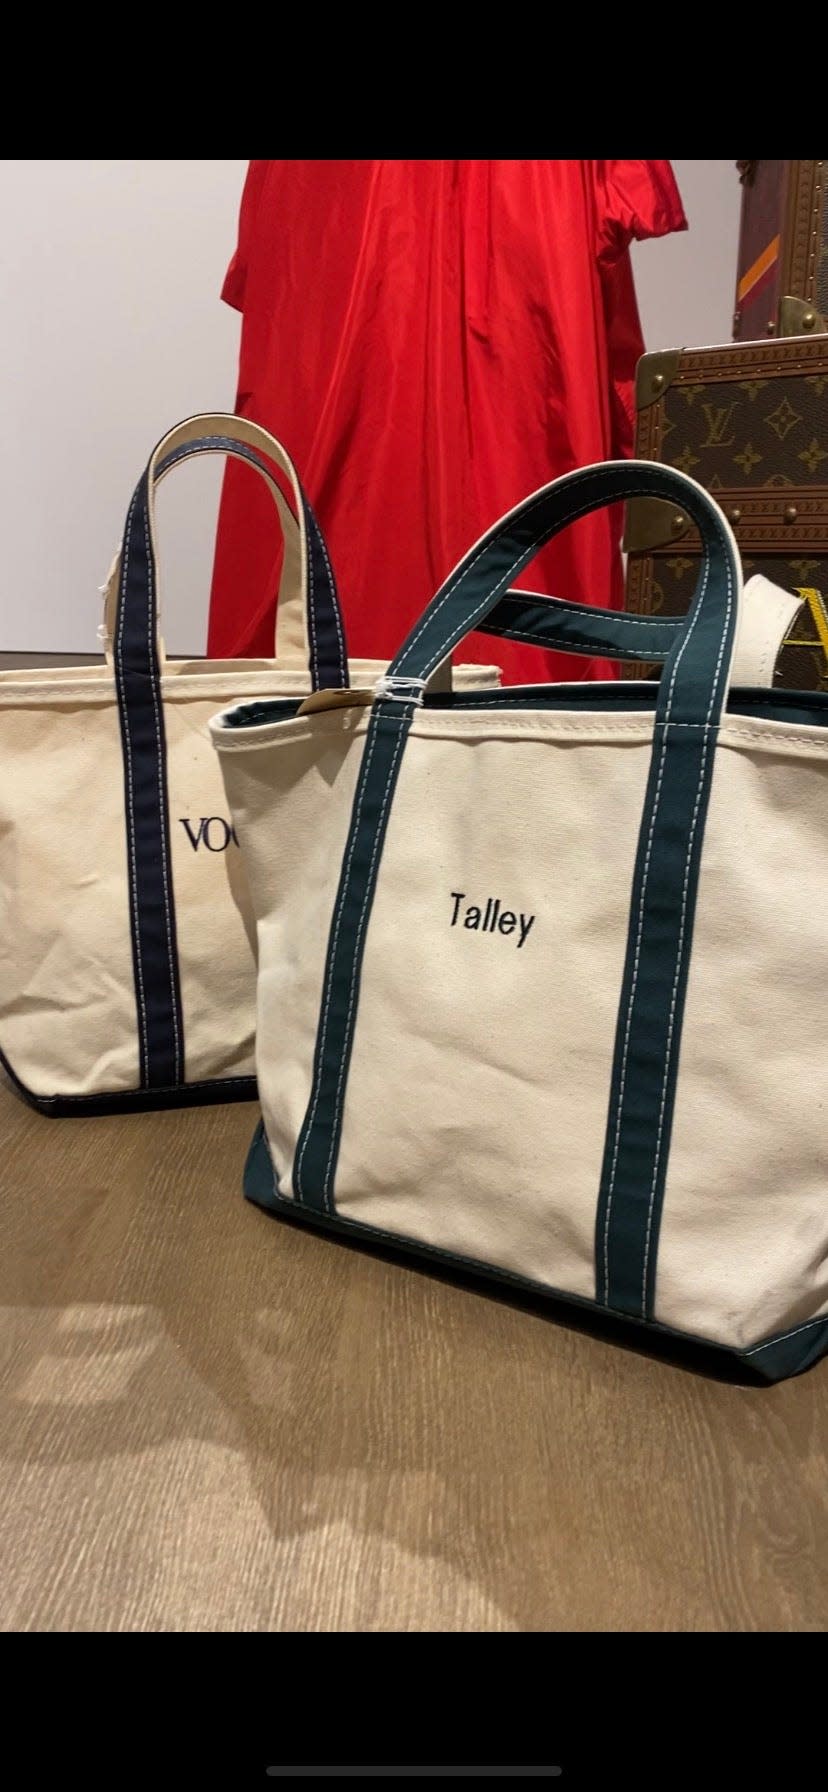 L.L. Bean canvas bags that were selected for the Talley collection.